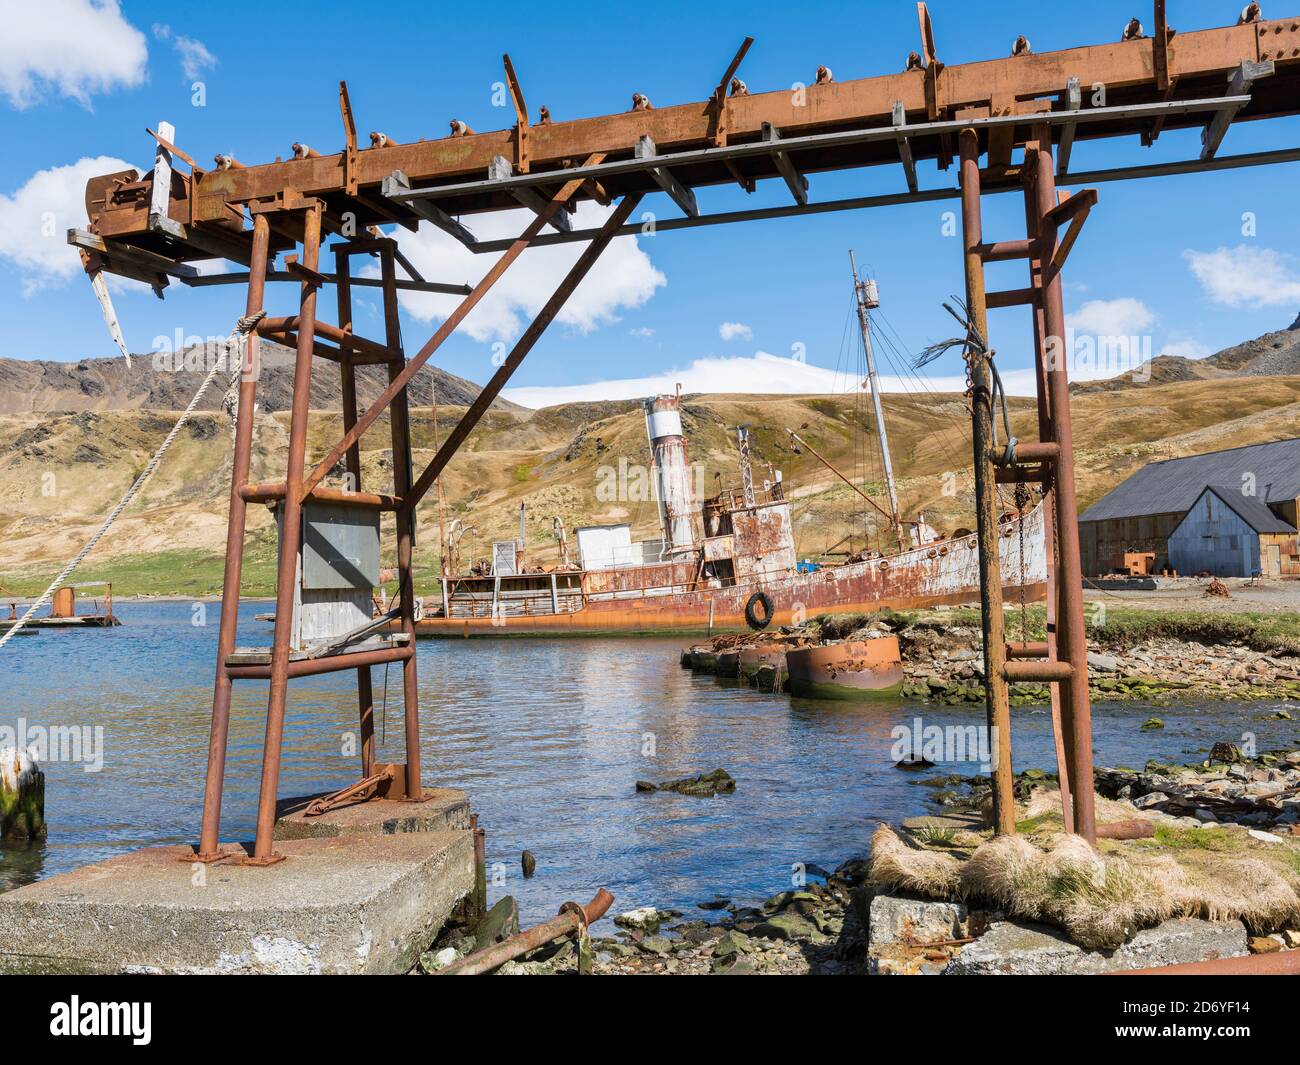 The Petrel a whale catcher. Grytviken Whaling Station in South Georgia. Grytviken is open to visitors, but most walls and roofs of the factory have be Stock Photo